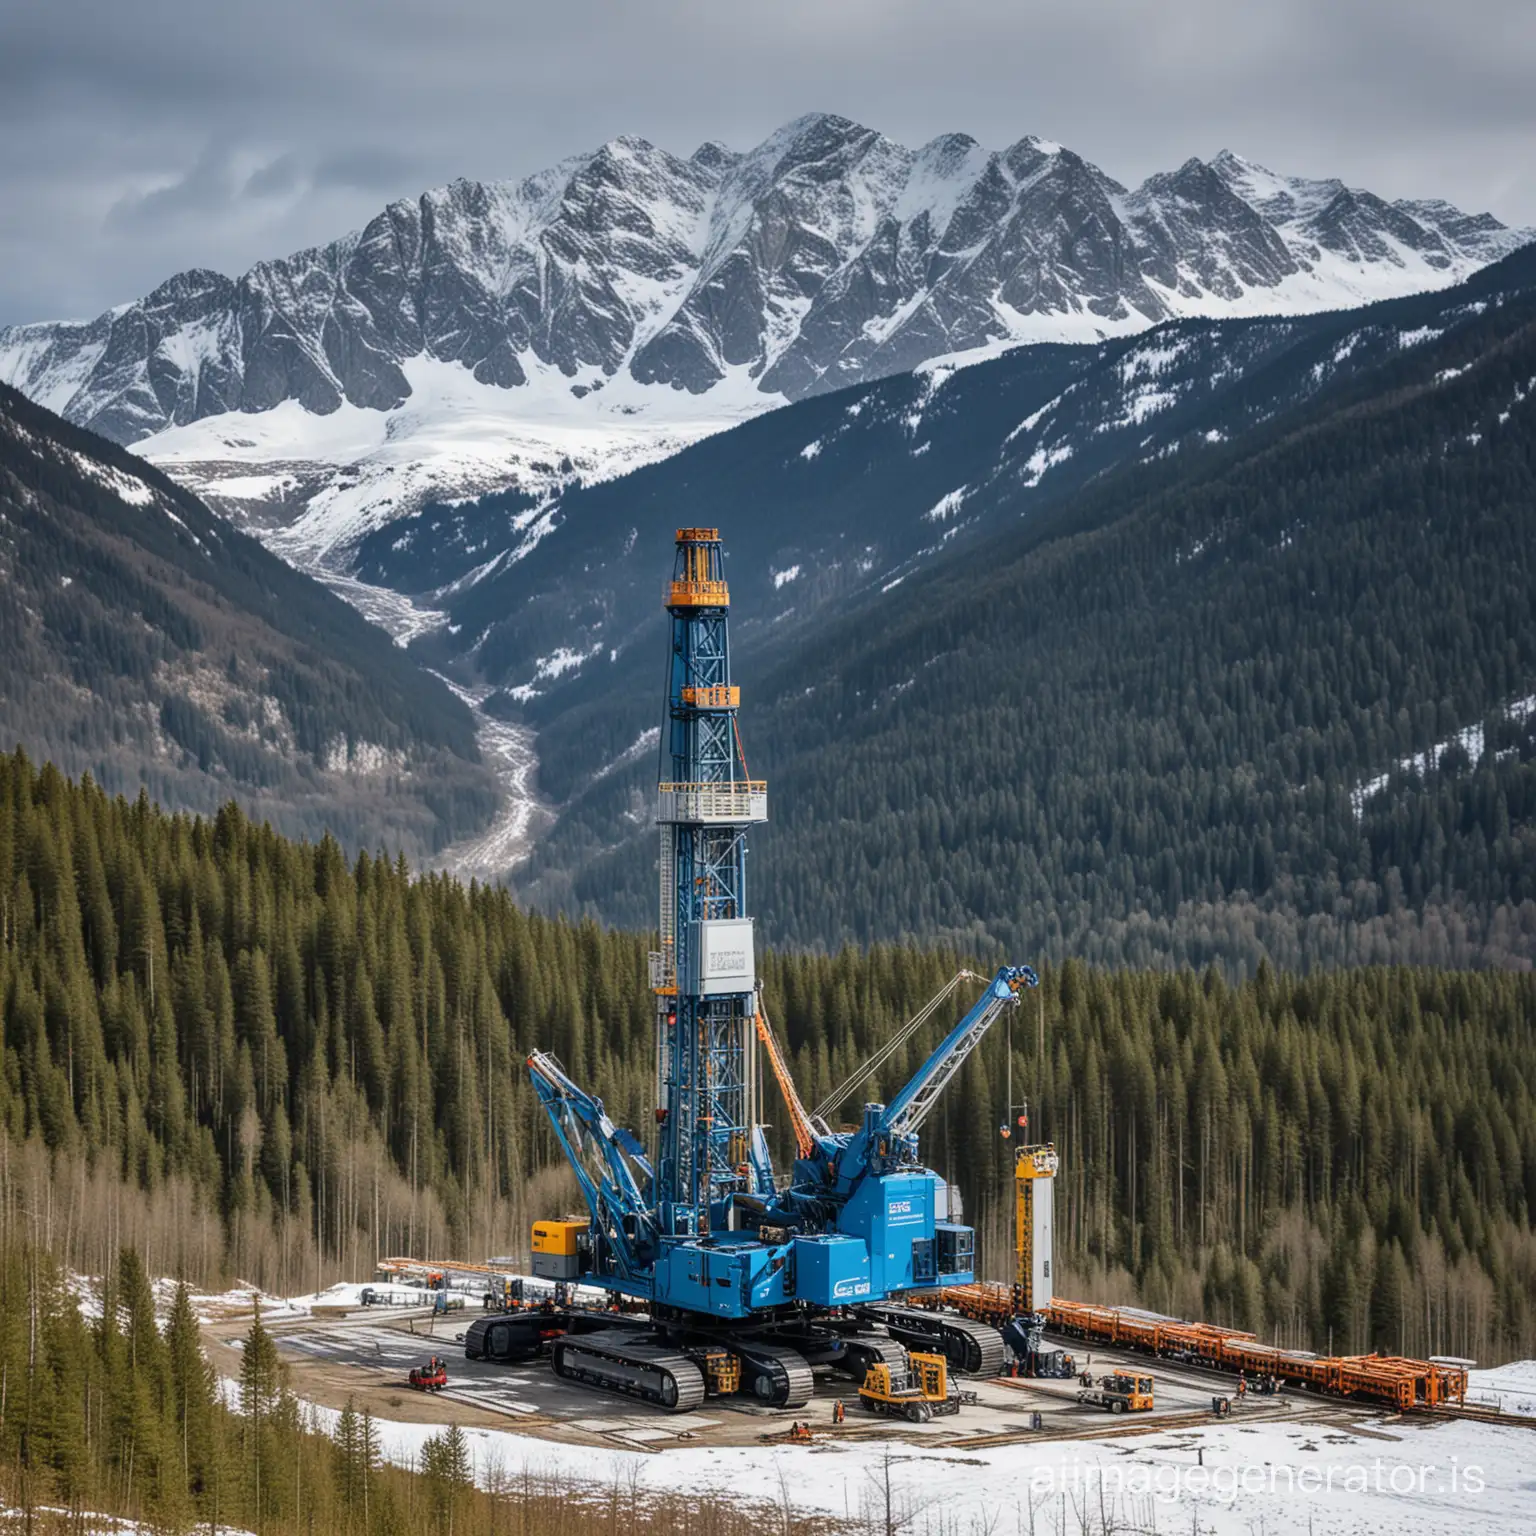 A blue drilling platform with the inscription Grisoni drilling in a larch forest in the mountains with snow-capped peaks in the background